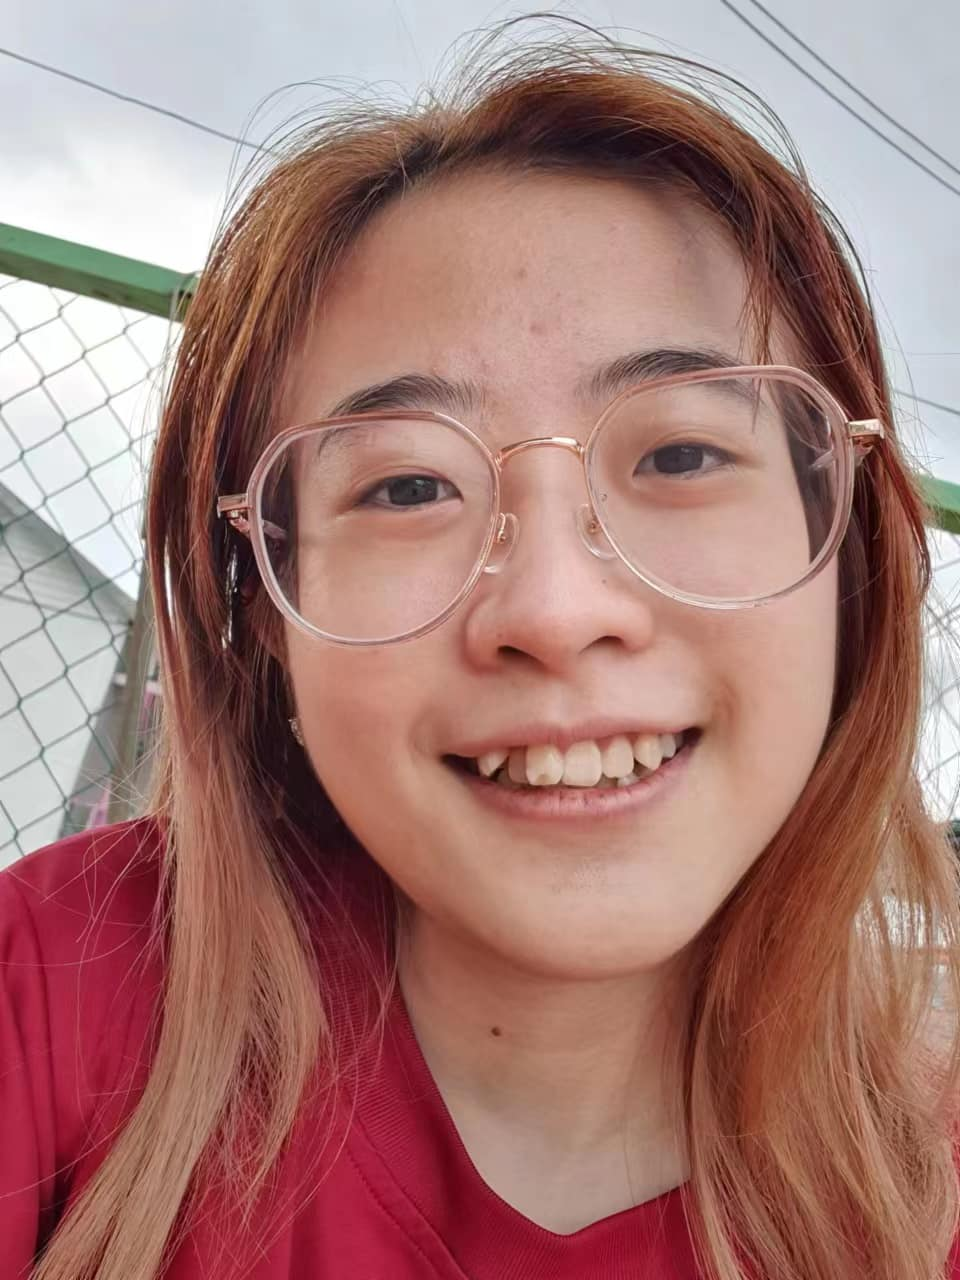 M'sian girl goes missing in klang, family begs her to return home safely